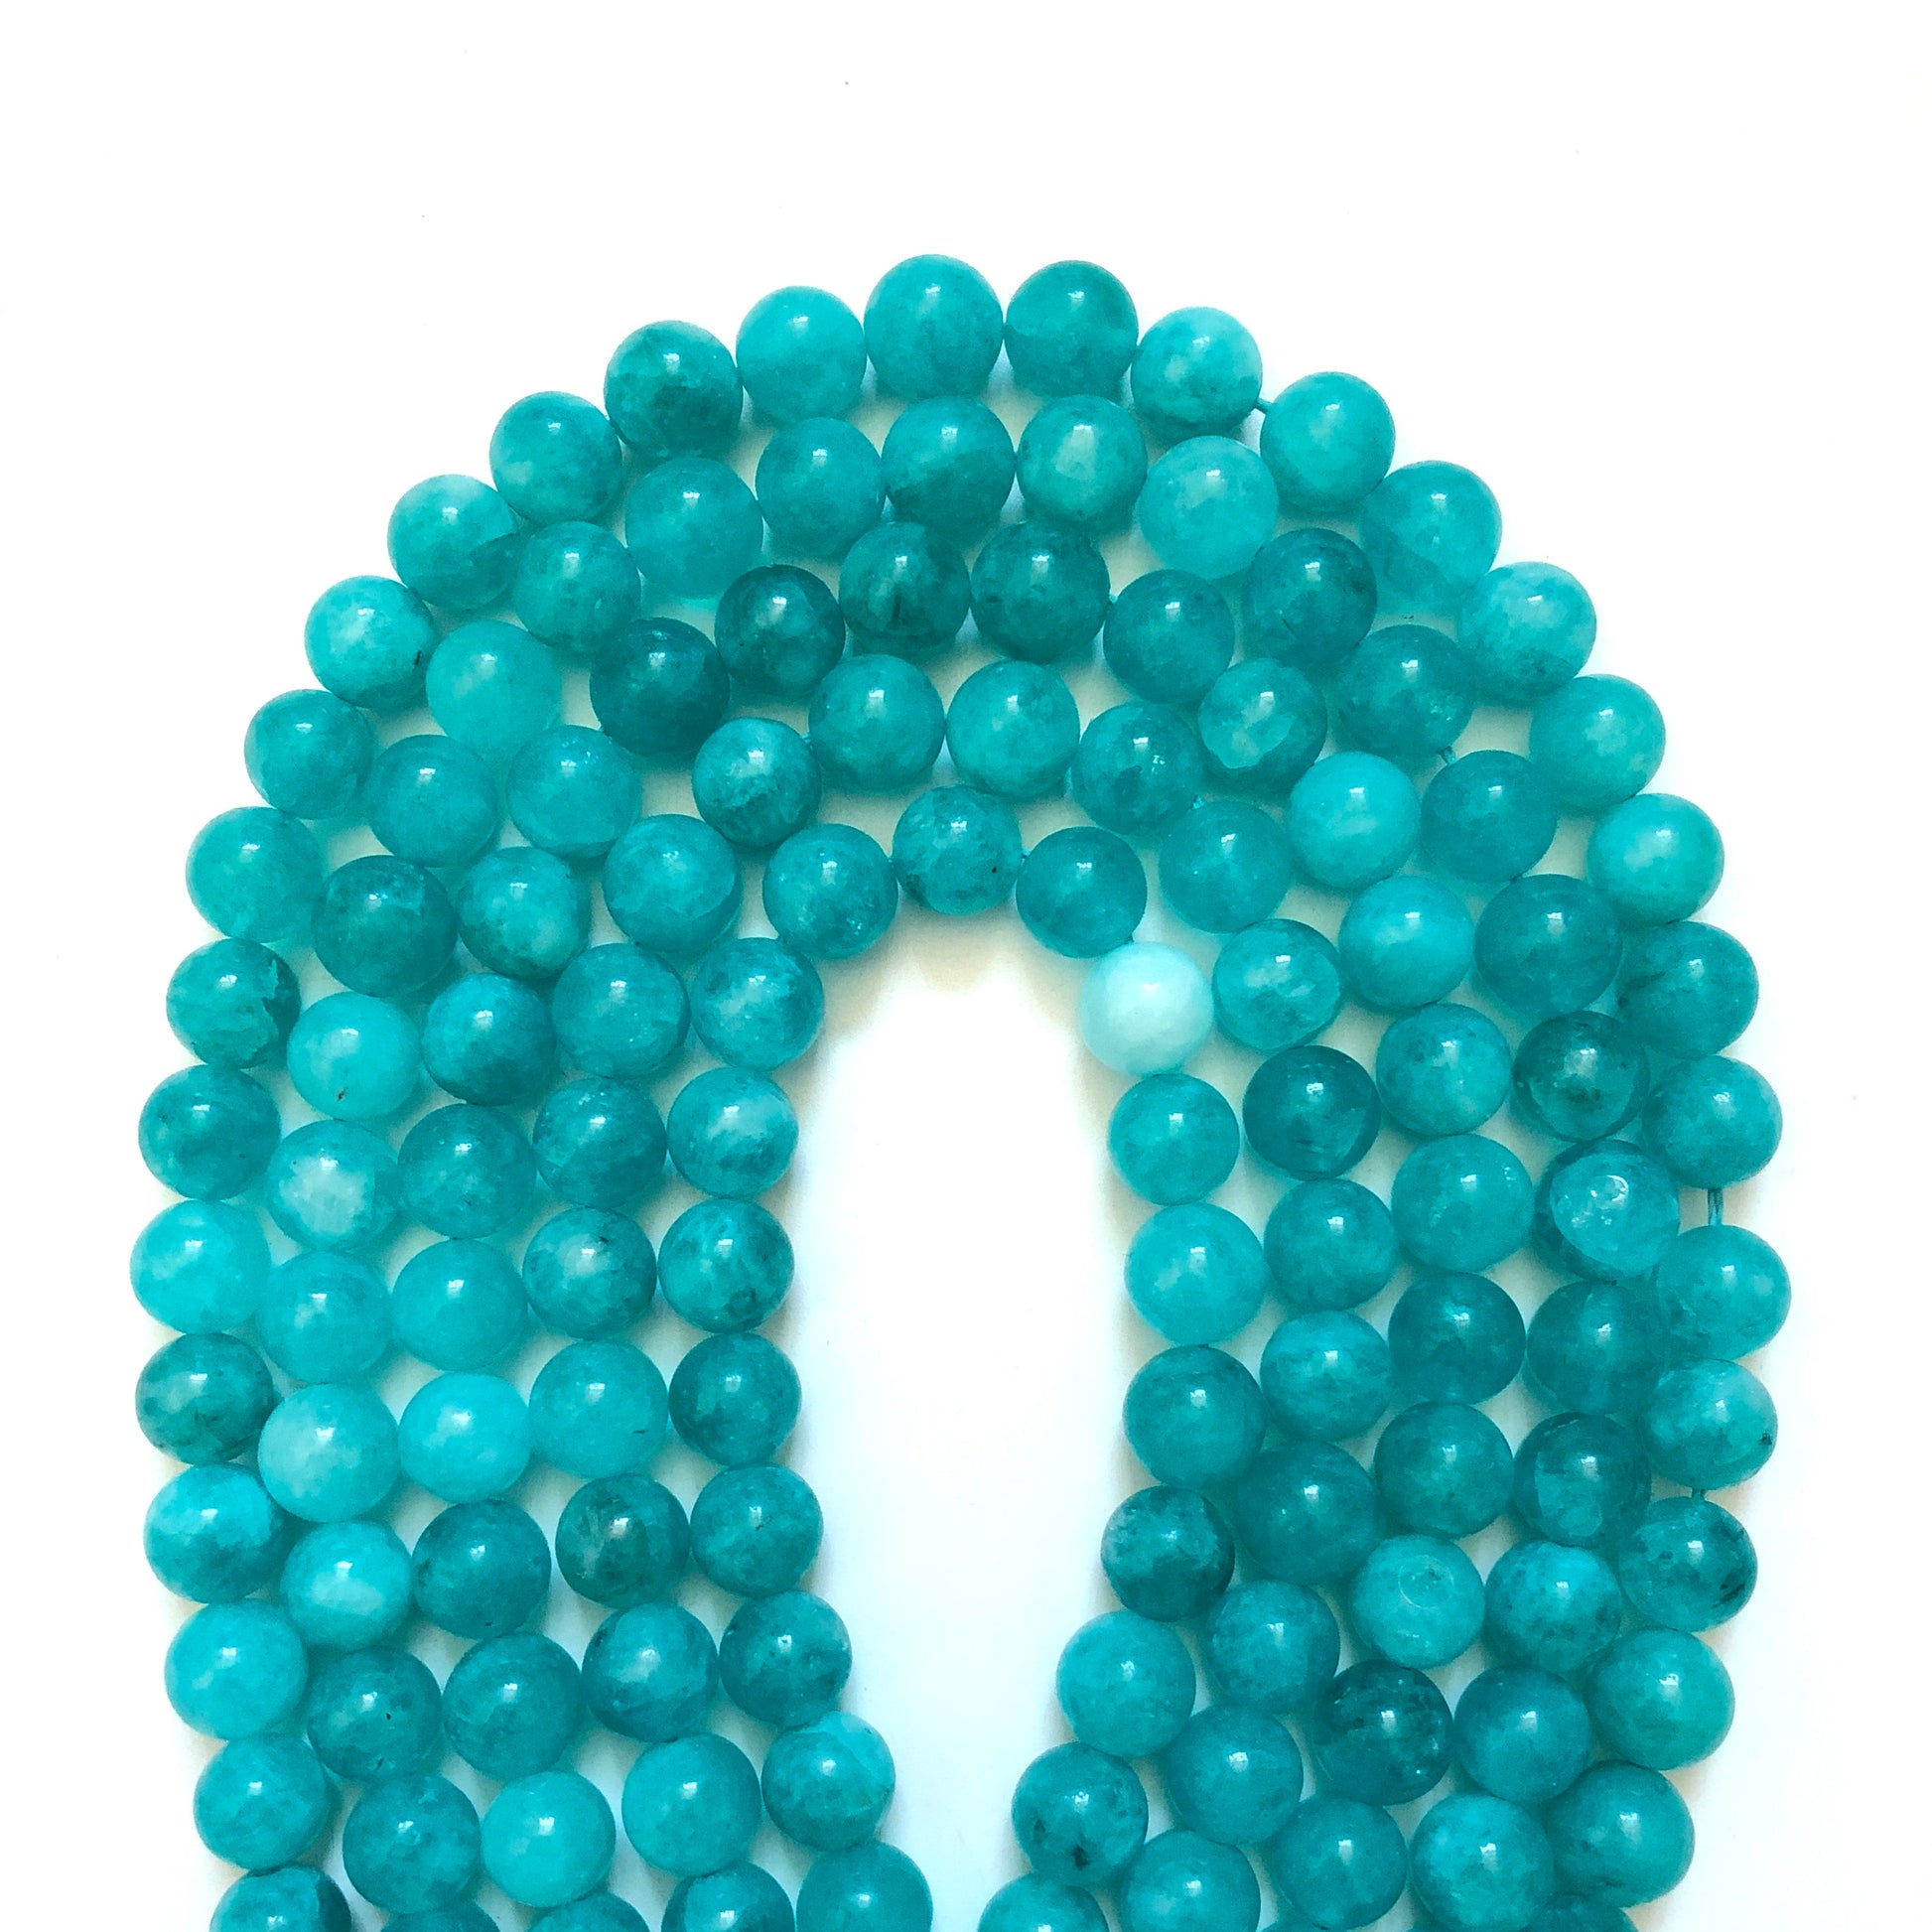 2 Strands/lot 10mm Multicolor Quartz Round Stone Beads Blue Amazonite Stone Beads New Beads Arrivals Other Stone Beads Charms Beads Beyond